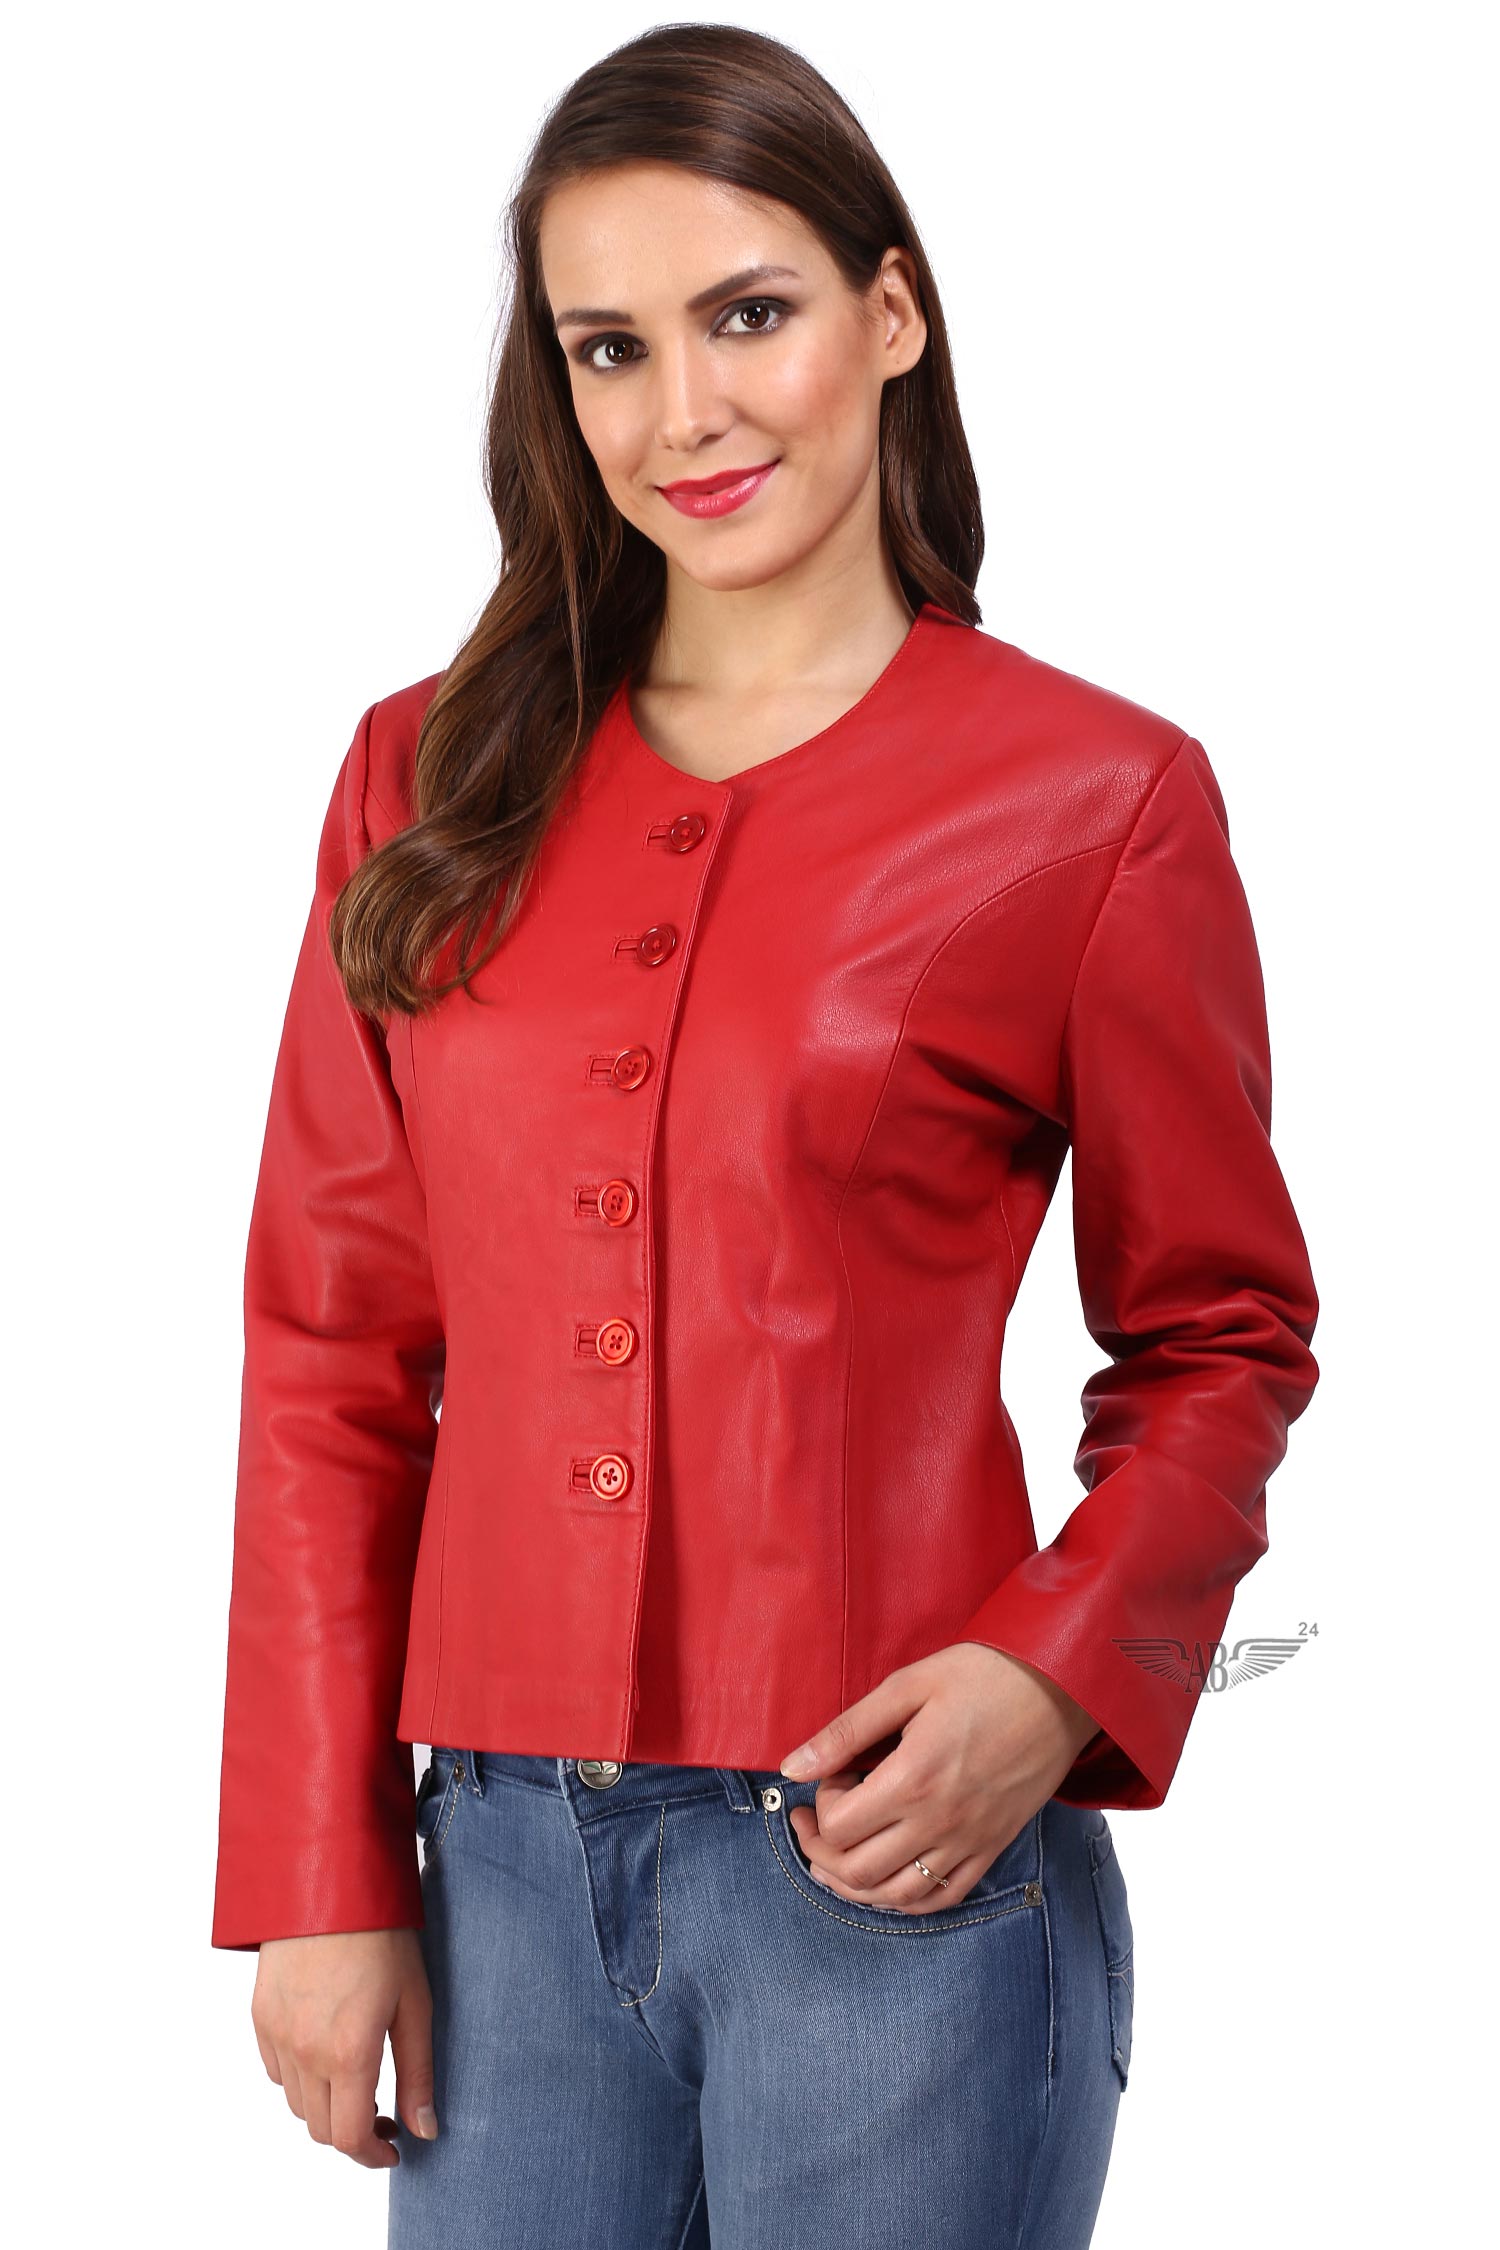 Side image of red CLASSIC CHANNEL JACKET